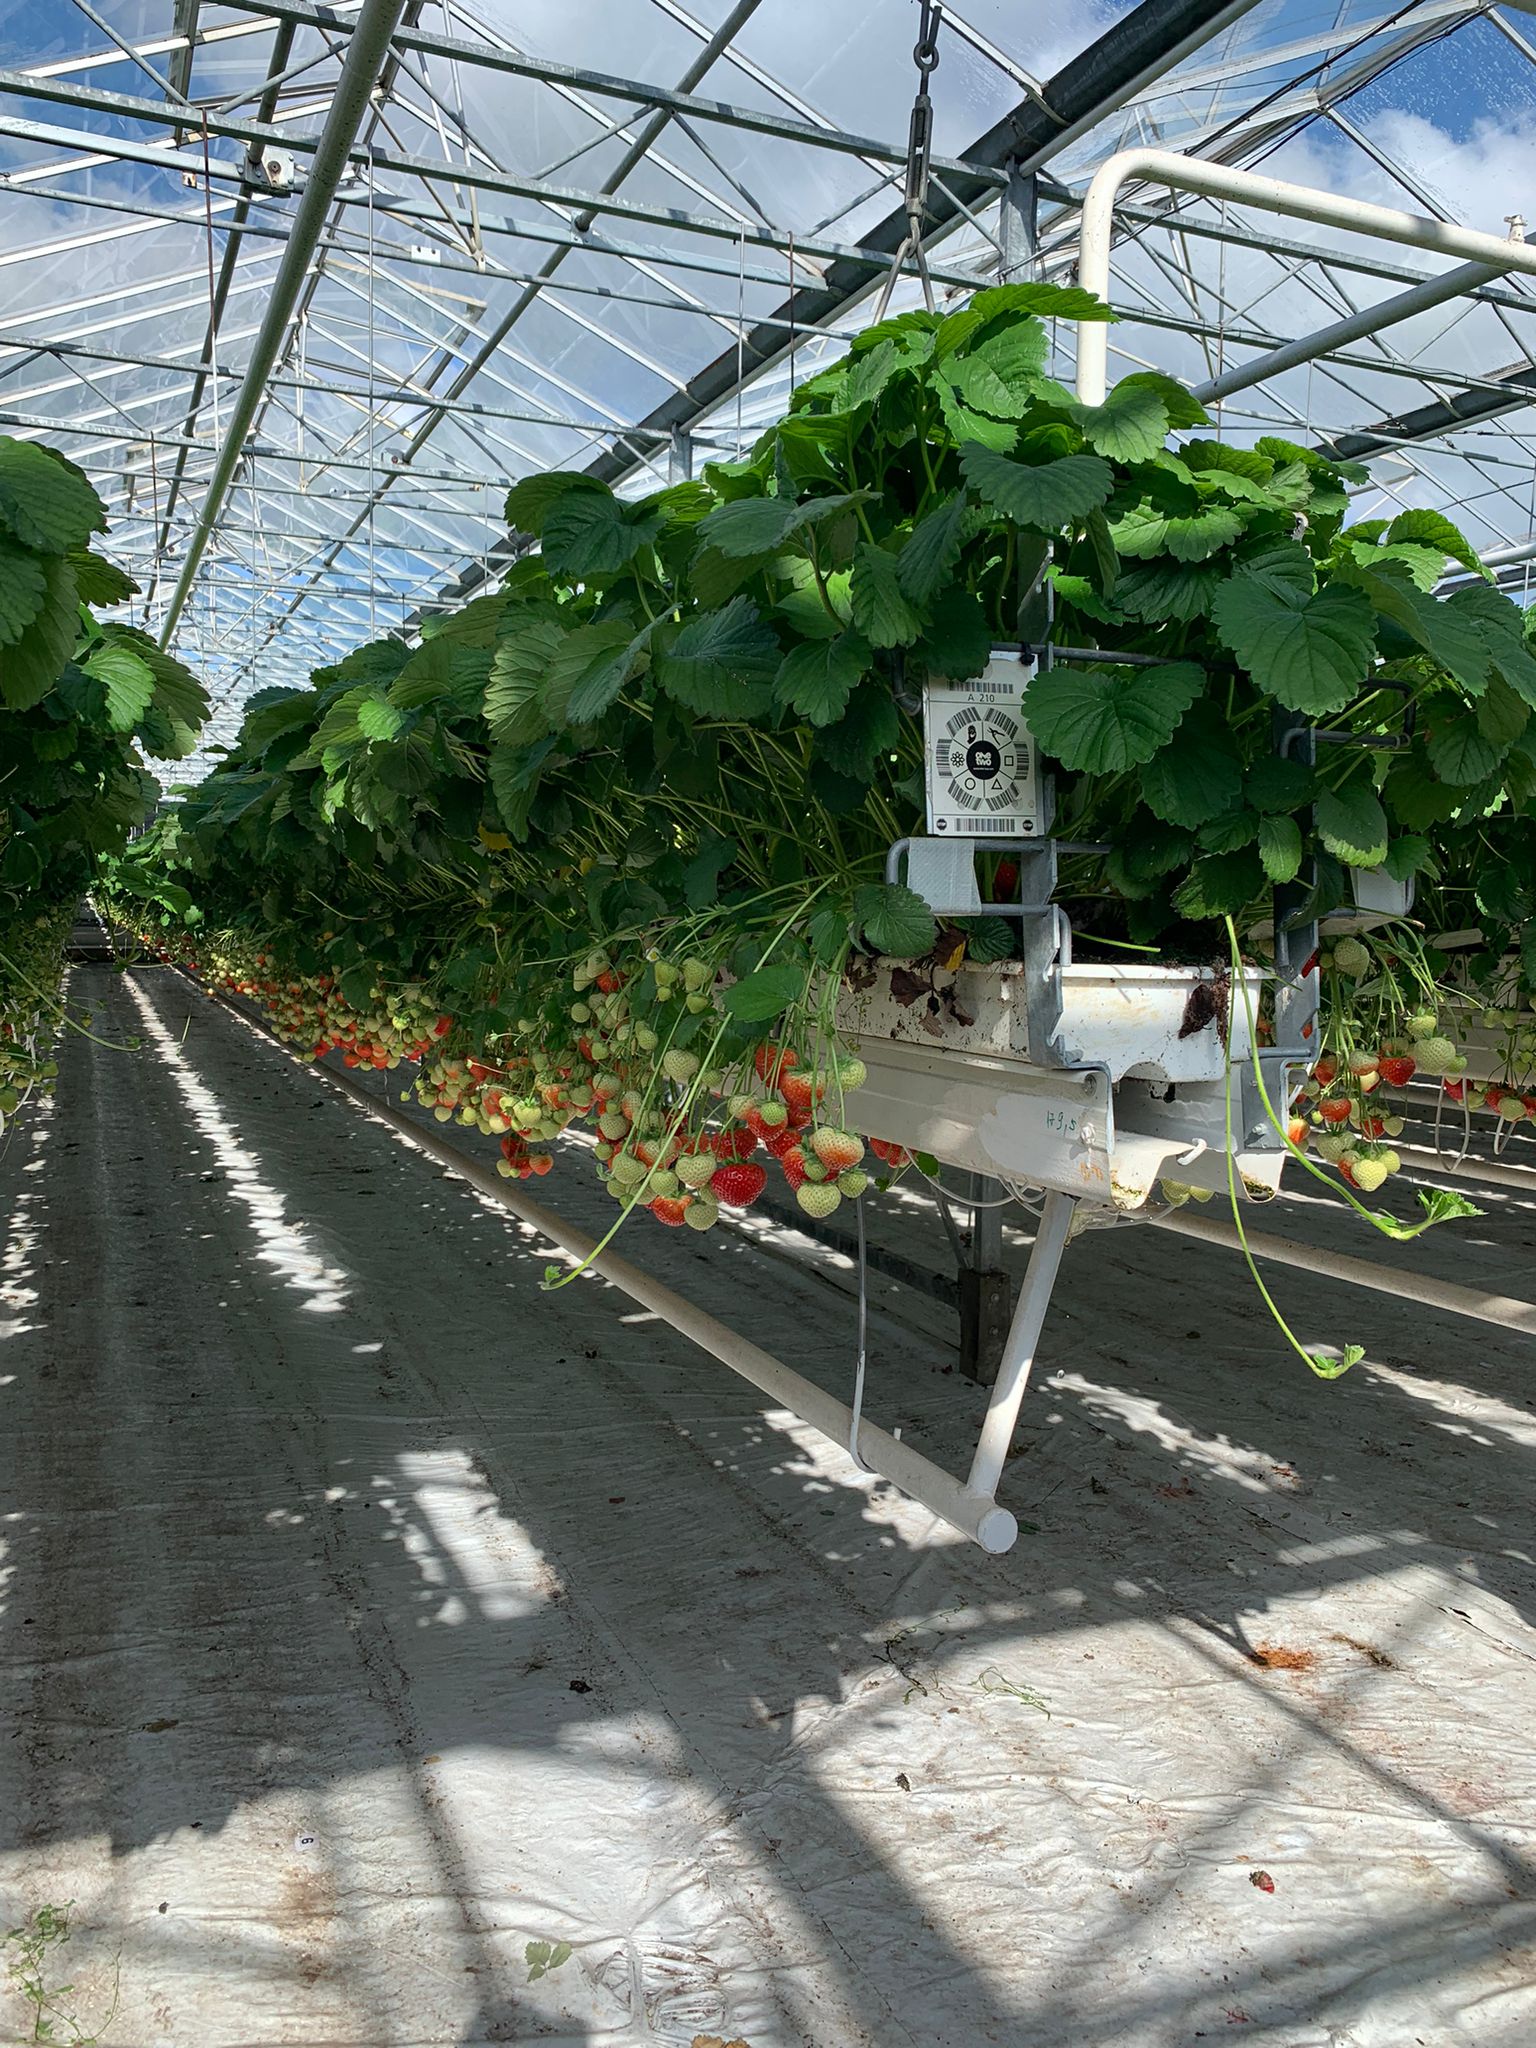 Technical visit to Belgium by strawberry producers! Did you know